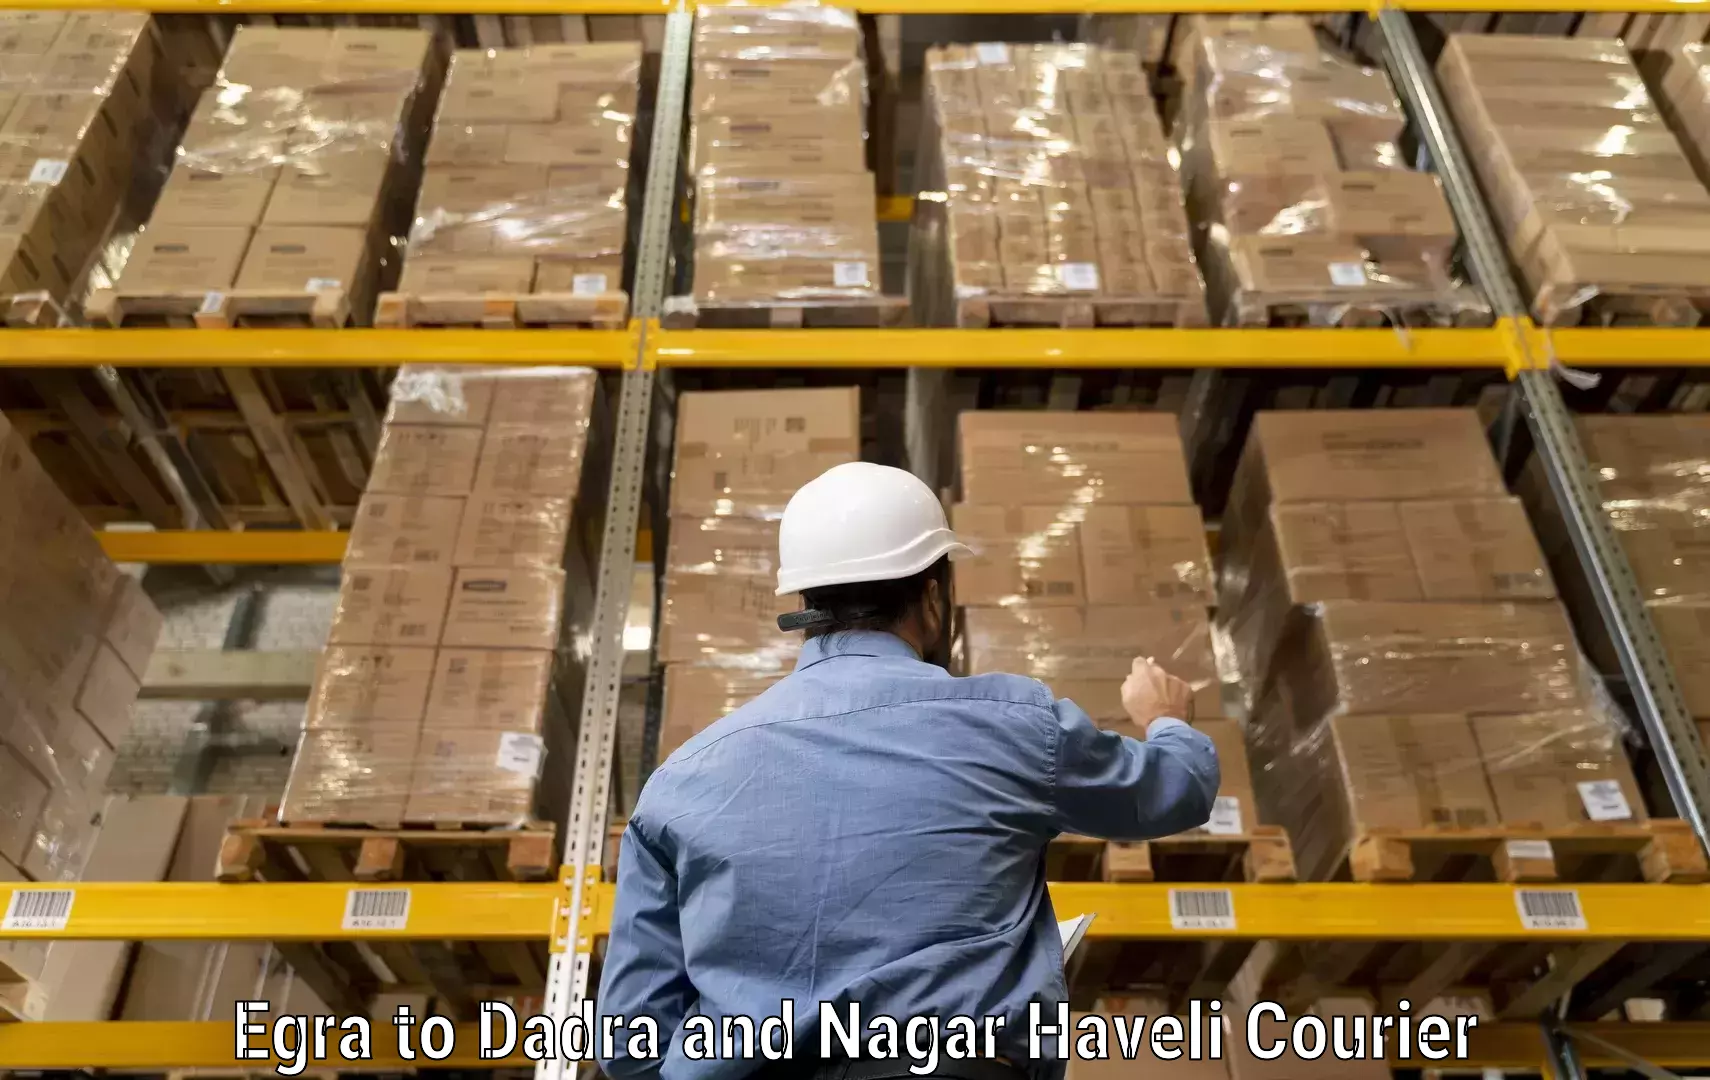 Quick courier services in Egra to Dadra and Nagar Haveli